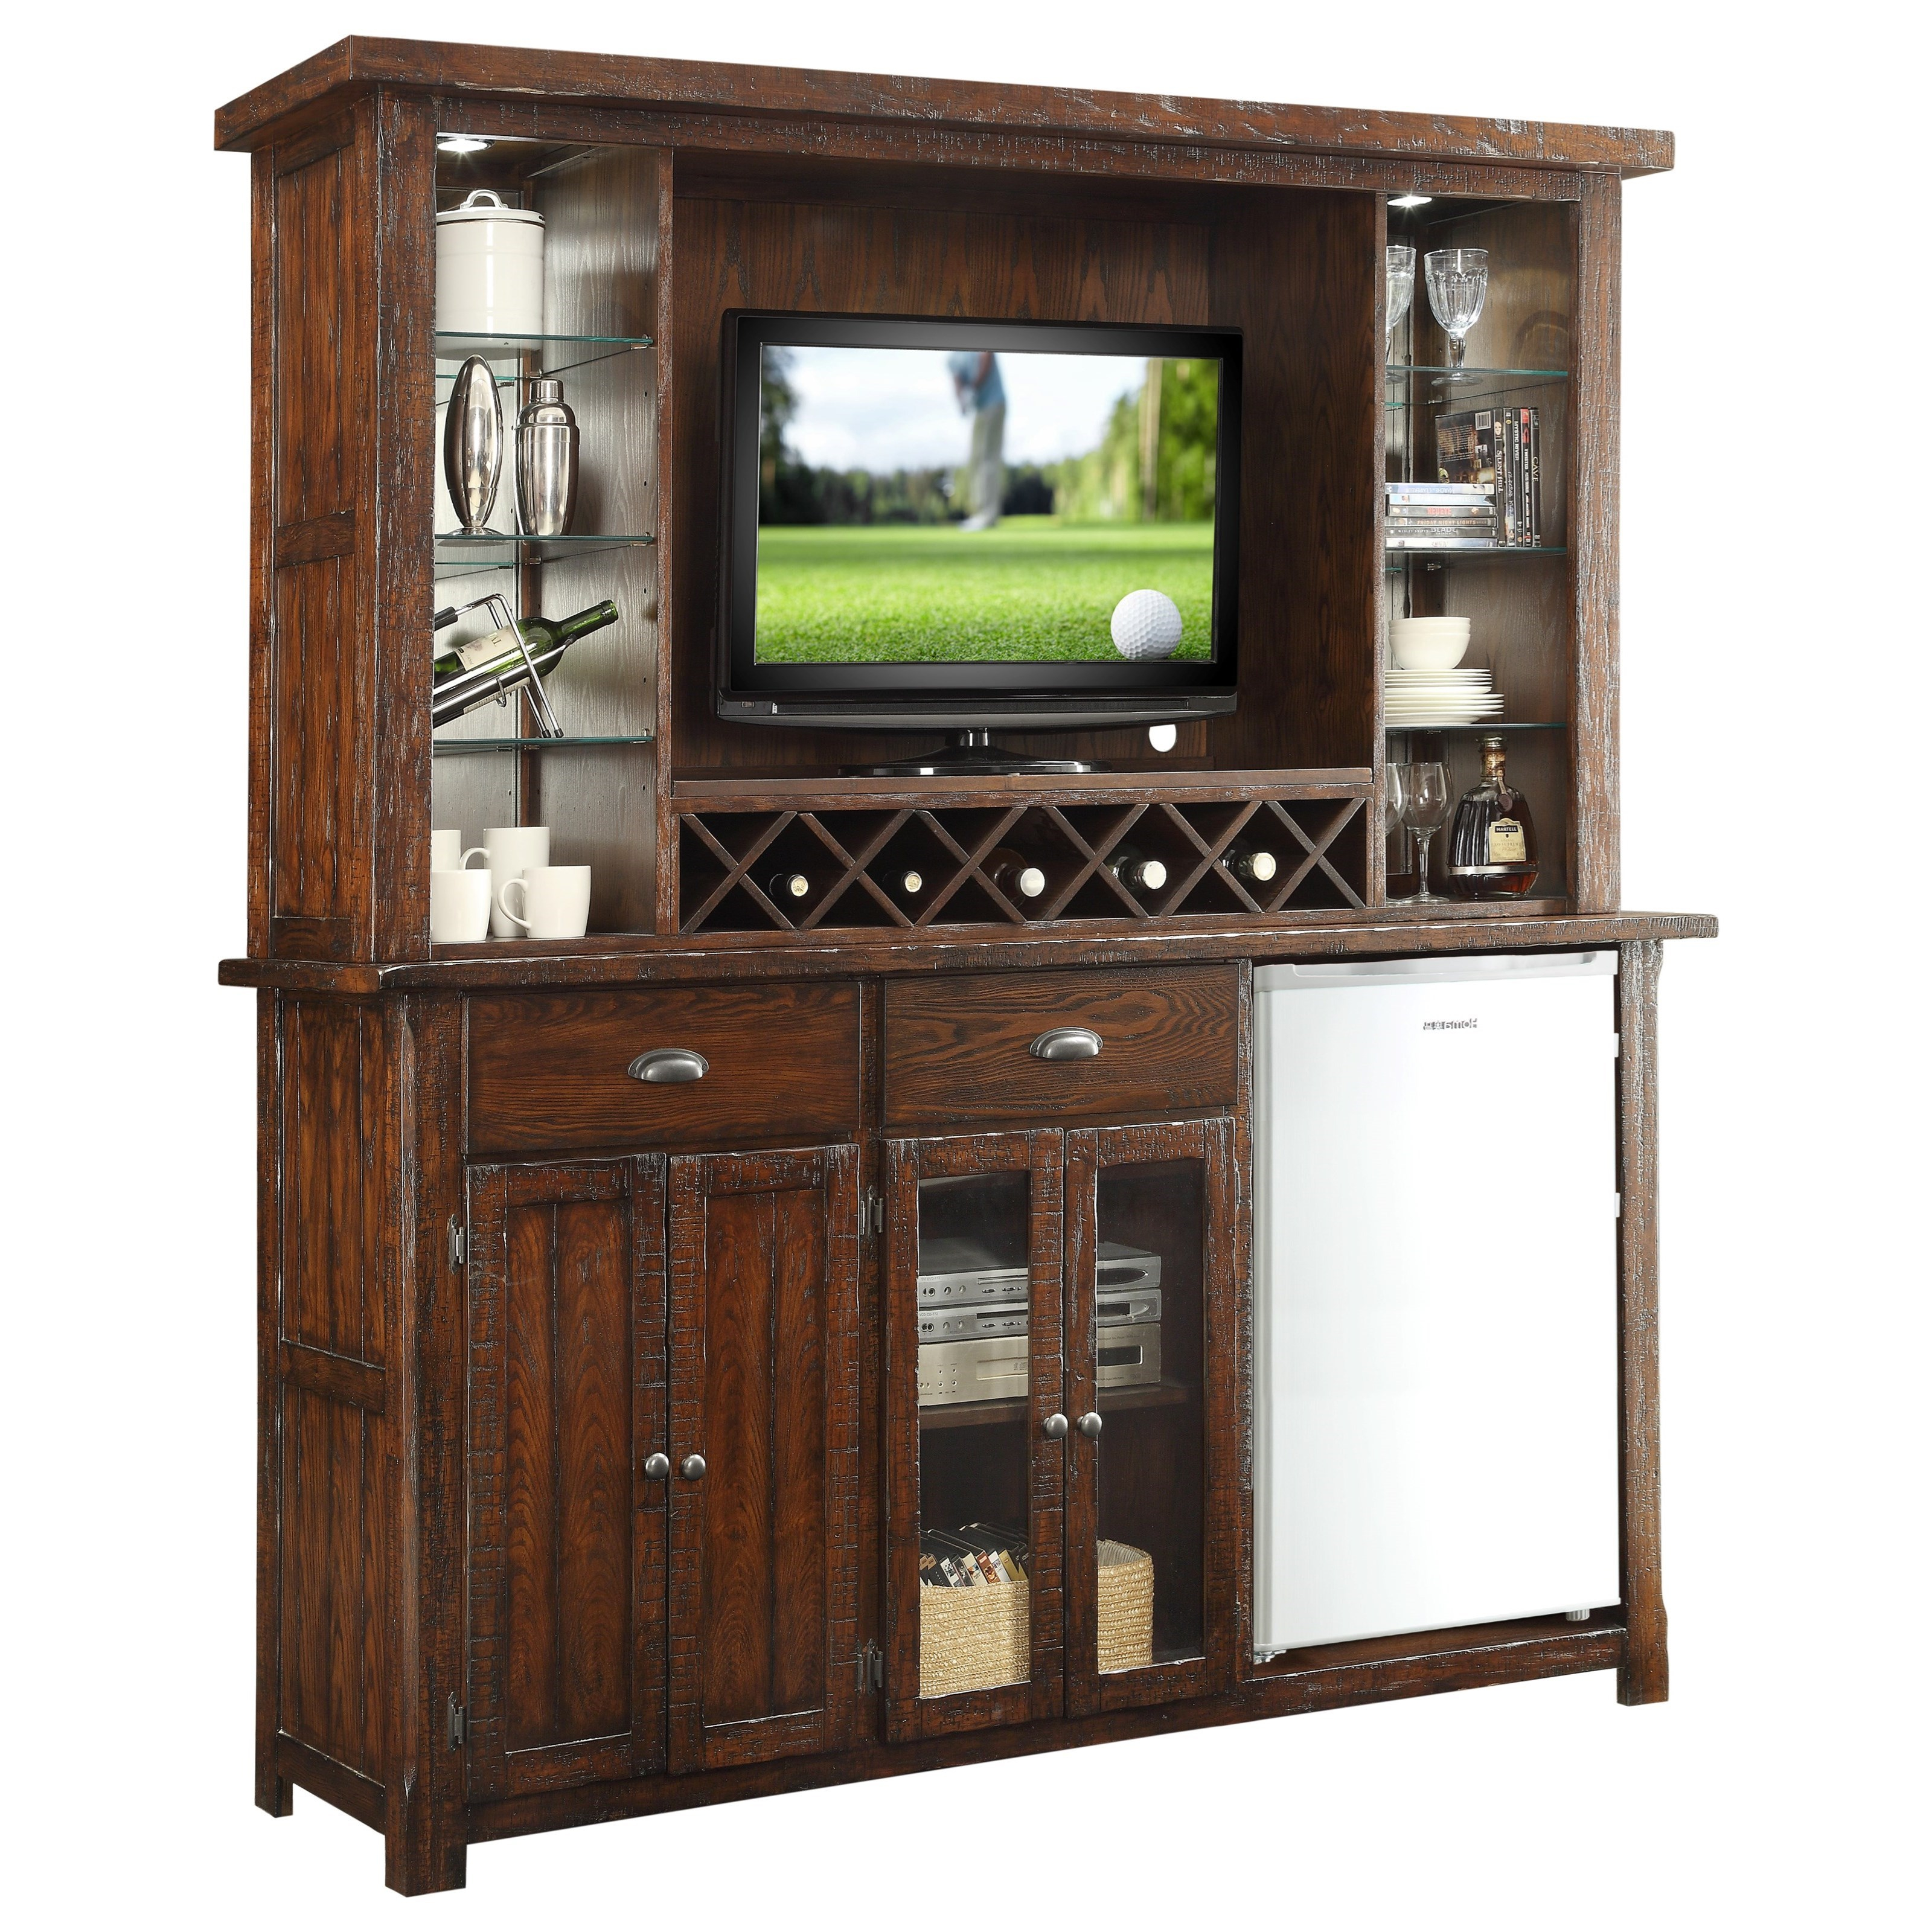 Gettysburg Gettysburg Bar Cabinet With Built In Wine Rack Eci Furniture At Wayside Furniture with size 3200 X 3200